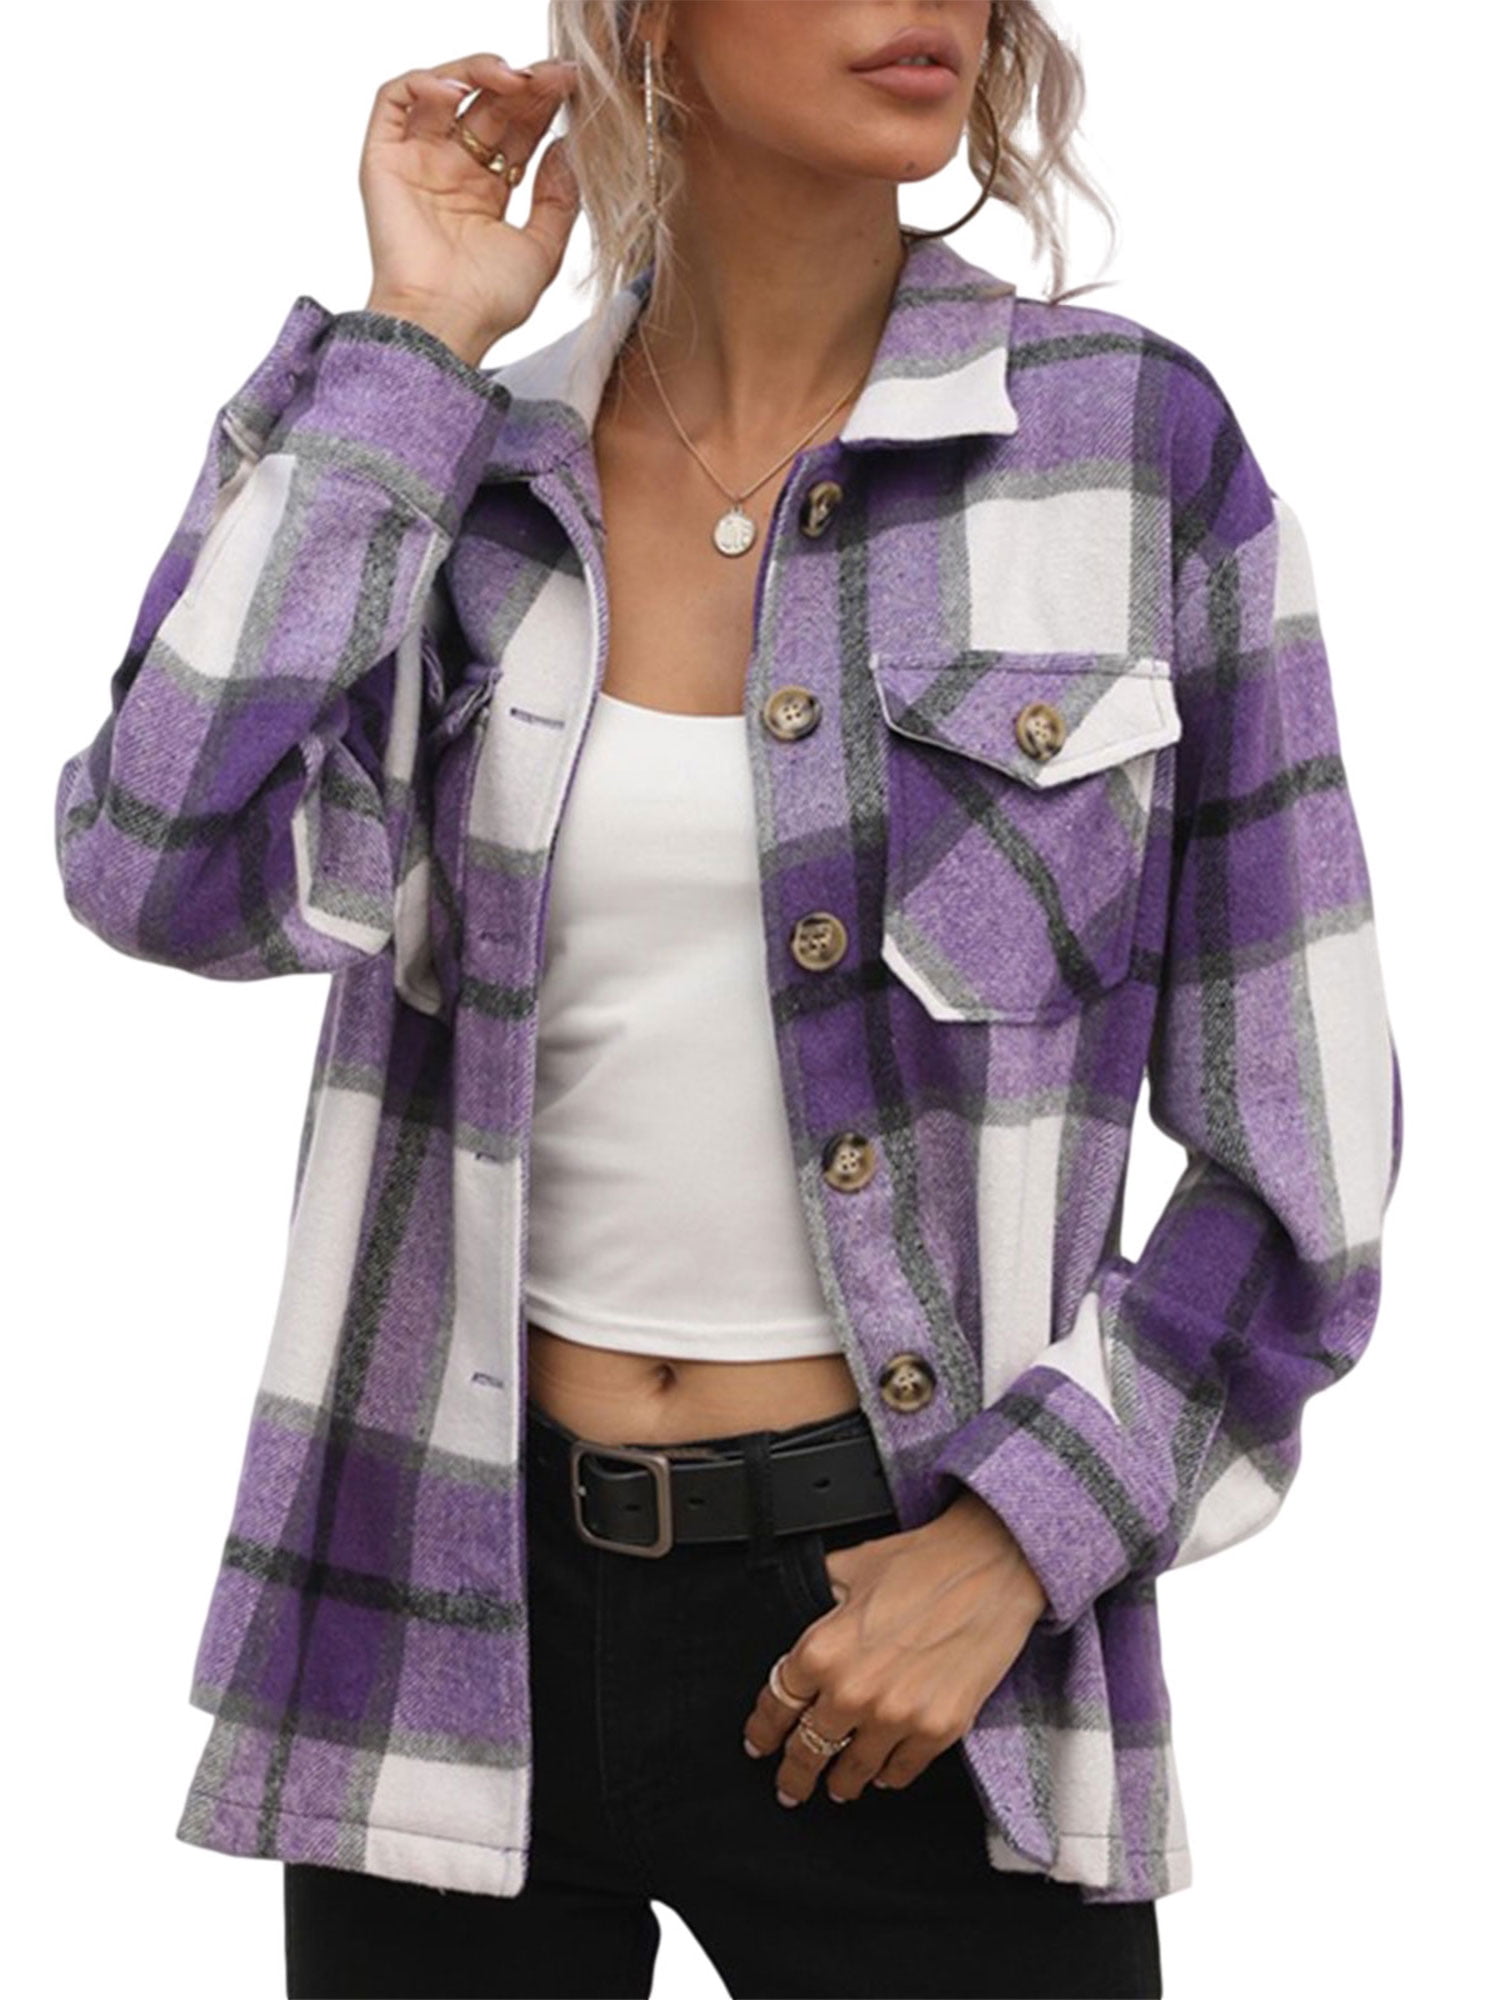 Fankle Womens Casual Vintage Plaid Lapel Button Up Pocketed Shacket Long Sleeve Jacket Coat Color Block Cardigan 